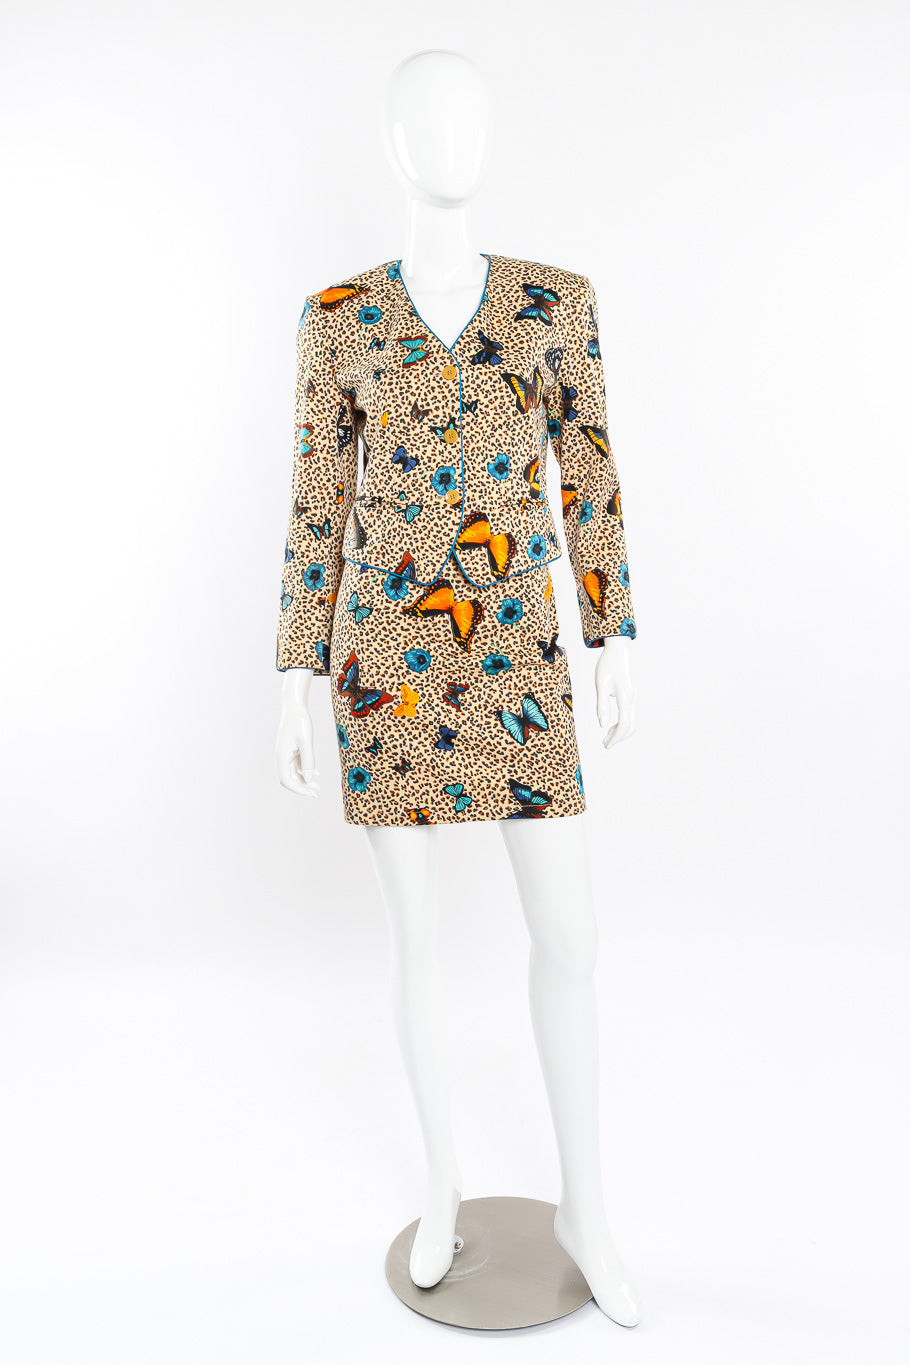 Butterfly jacket and skirt set by Kenzo on mannequin front full @recessla